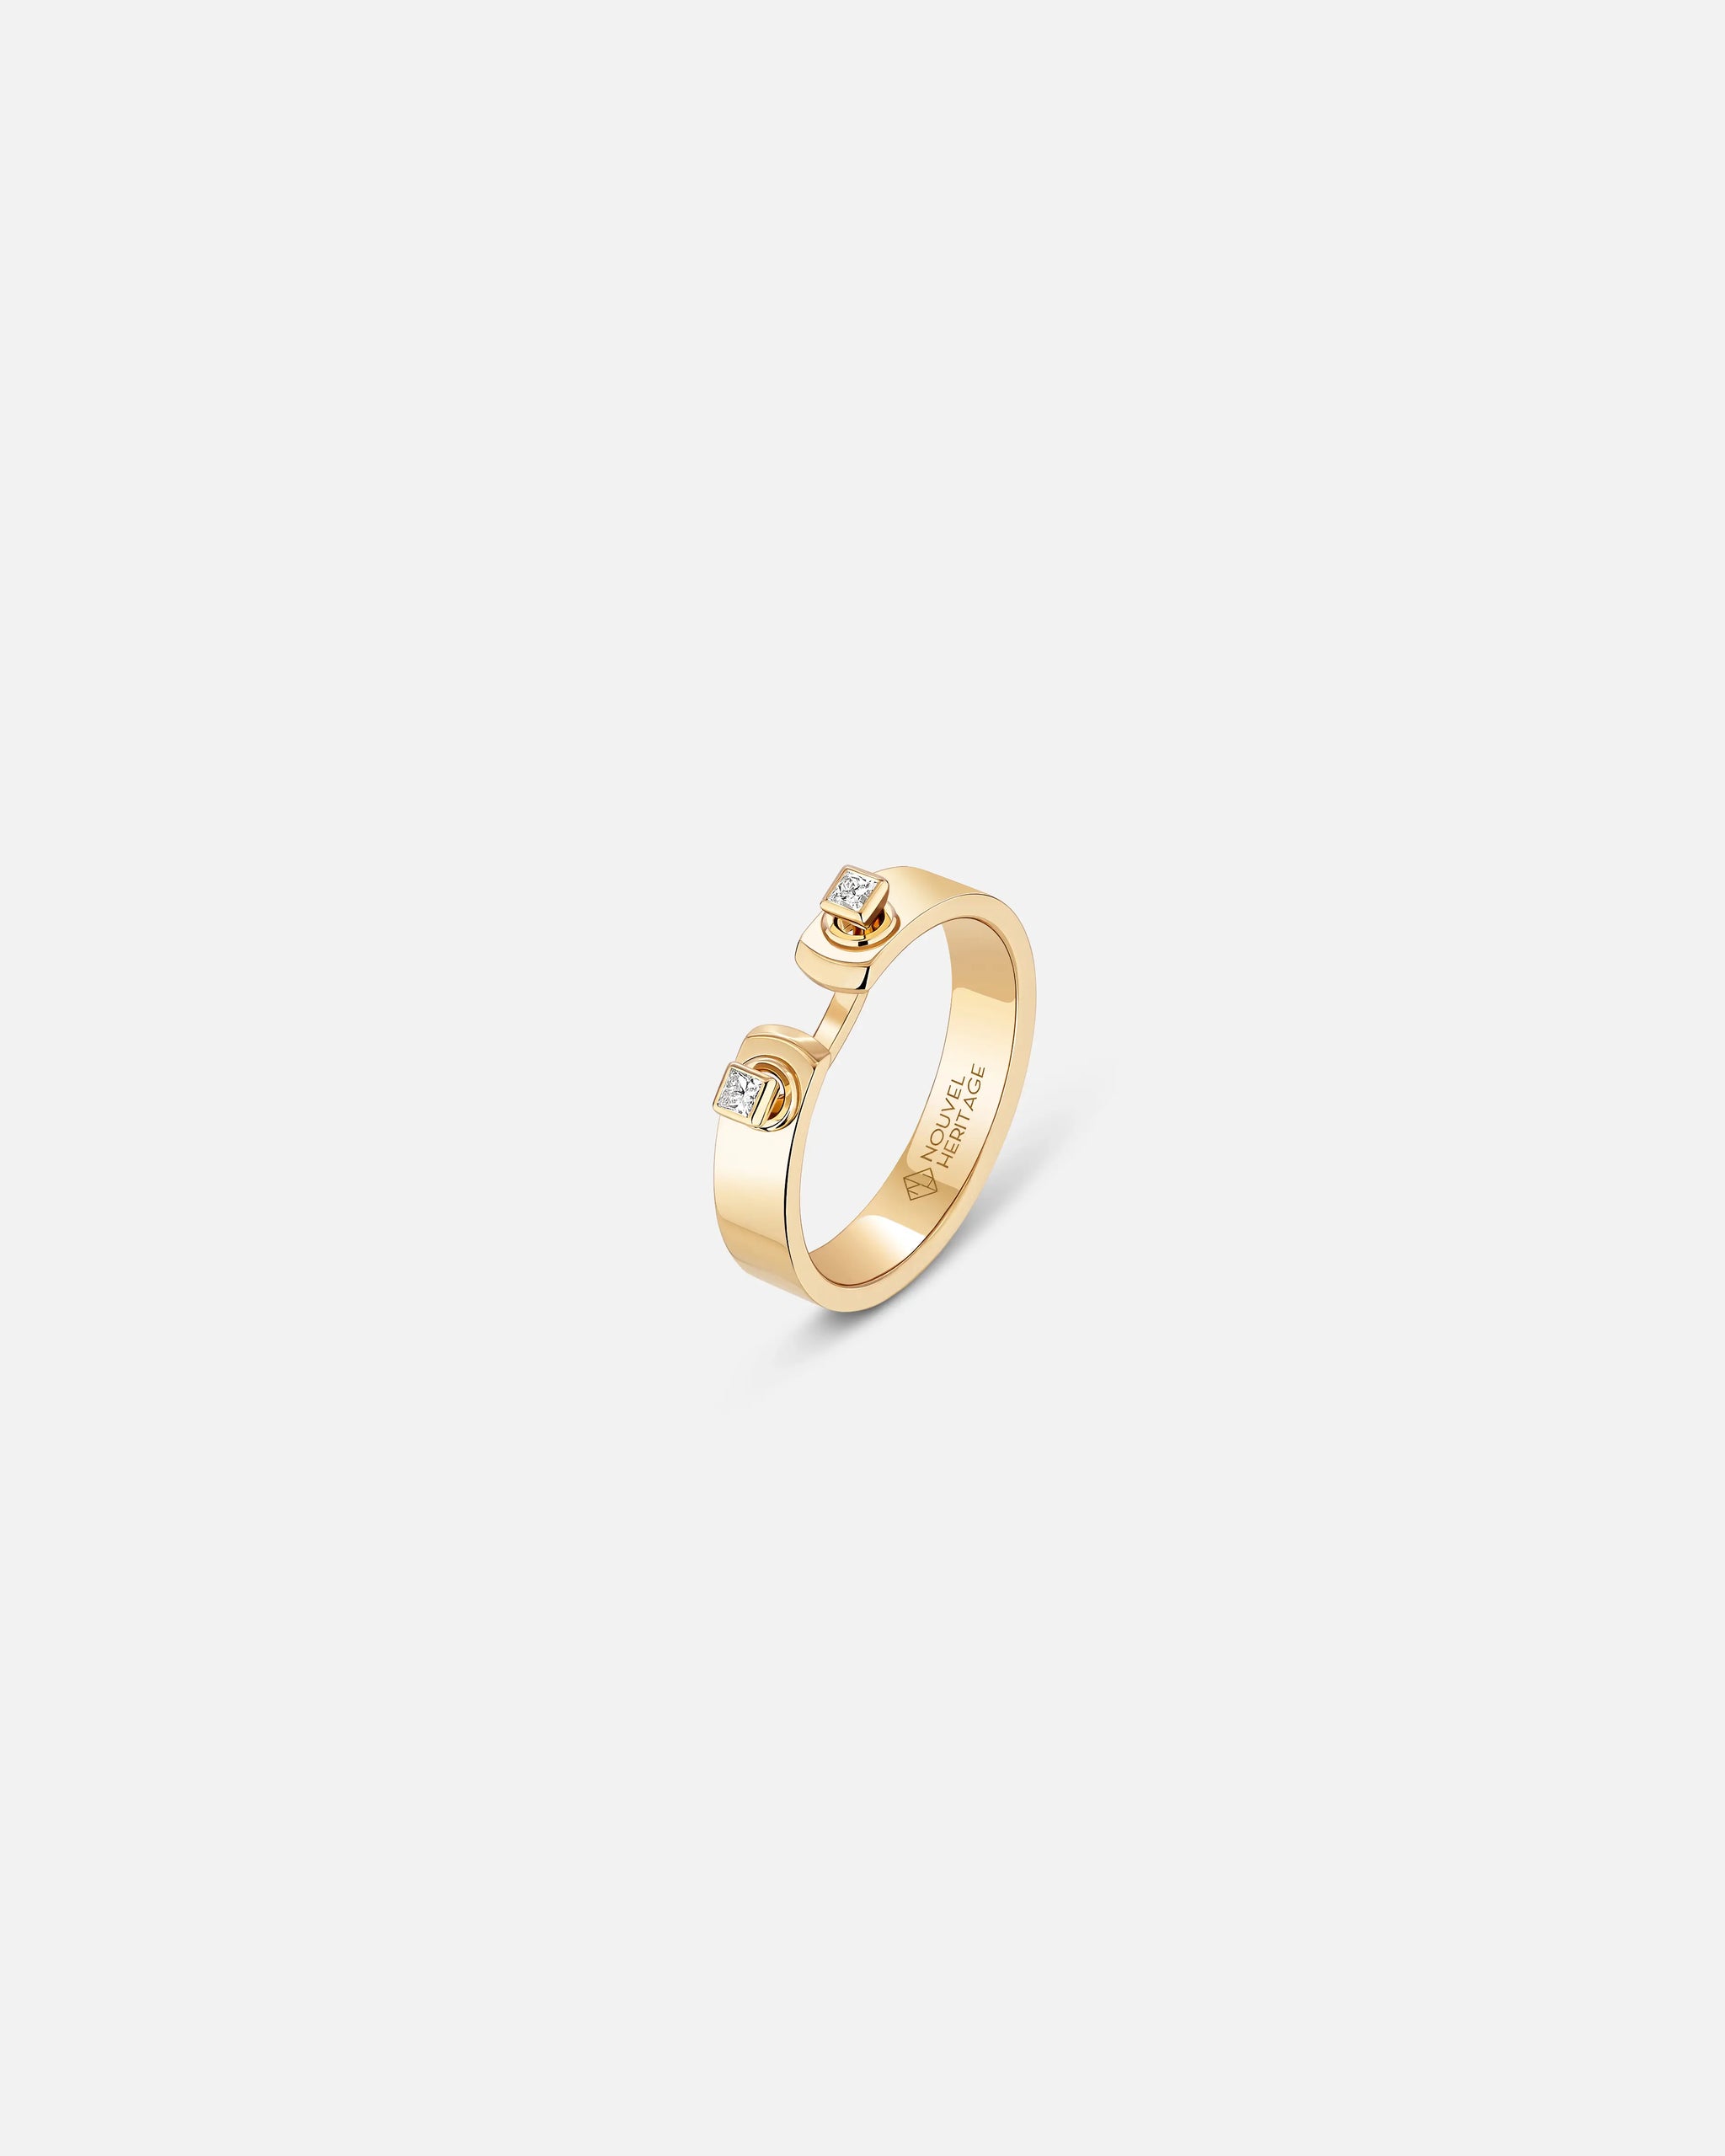 Dinner Date Mood Ring in Yellow Gold - 1 - Nouvel Heritage